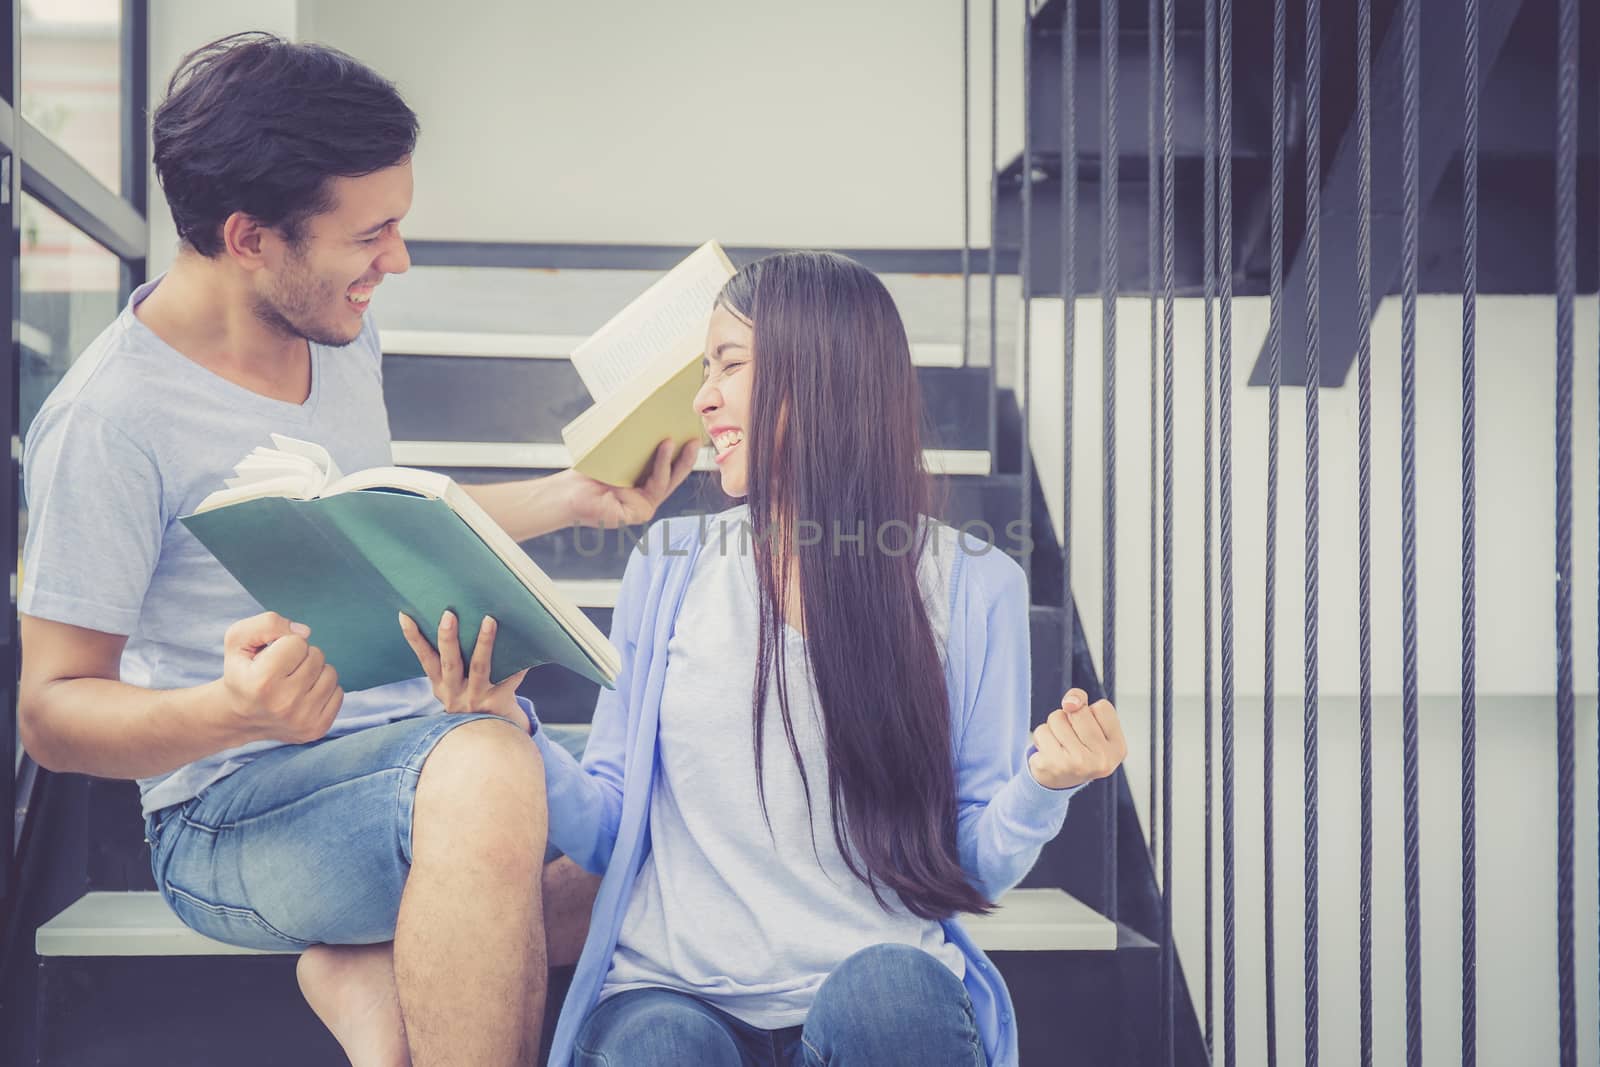 Couple asian handsome man and beautiful woman reading book and glad at home, boyfriend and girlfriend with activities together for leisure, education success concept.
